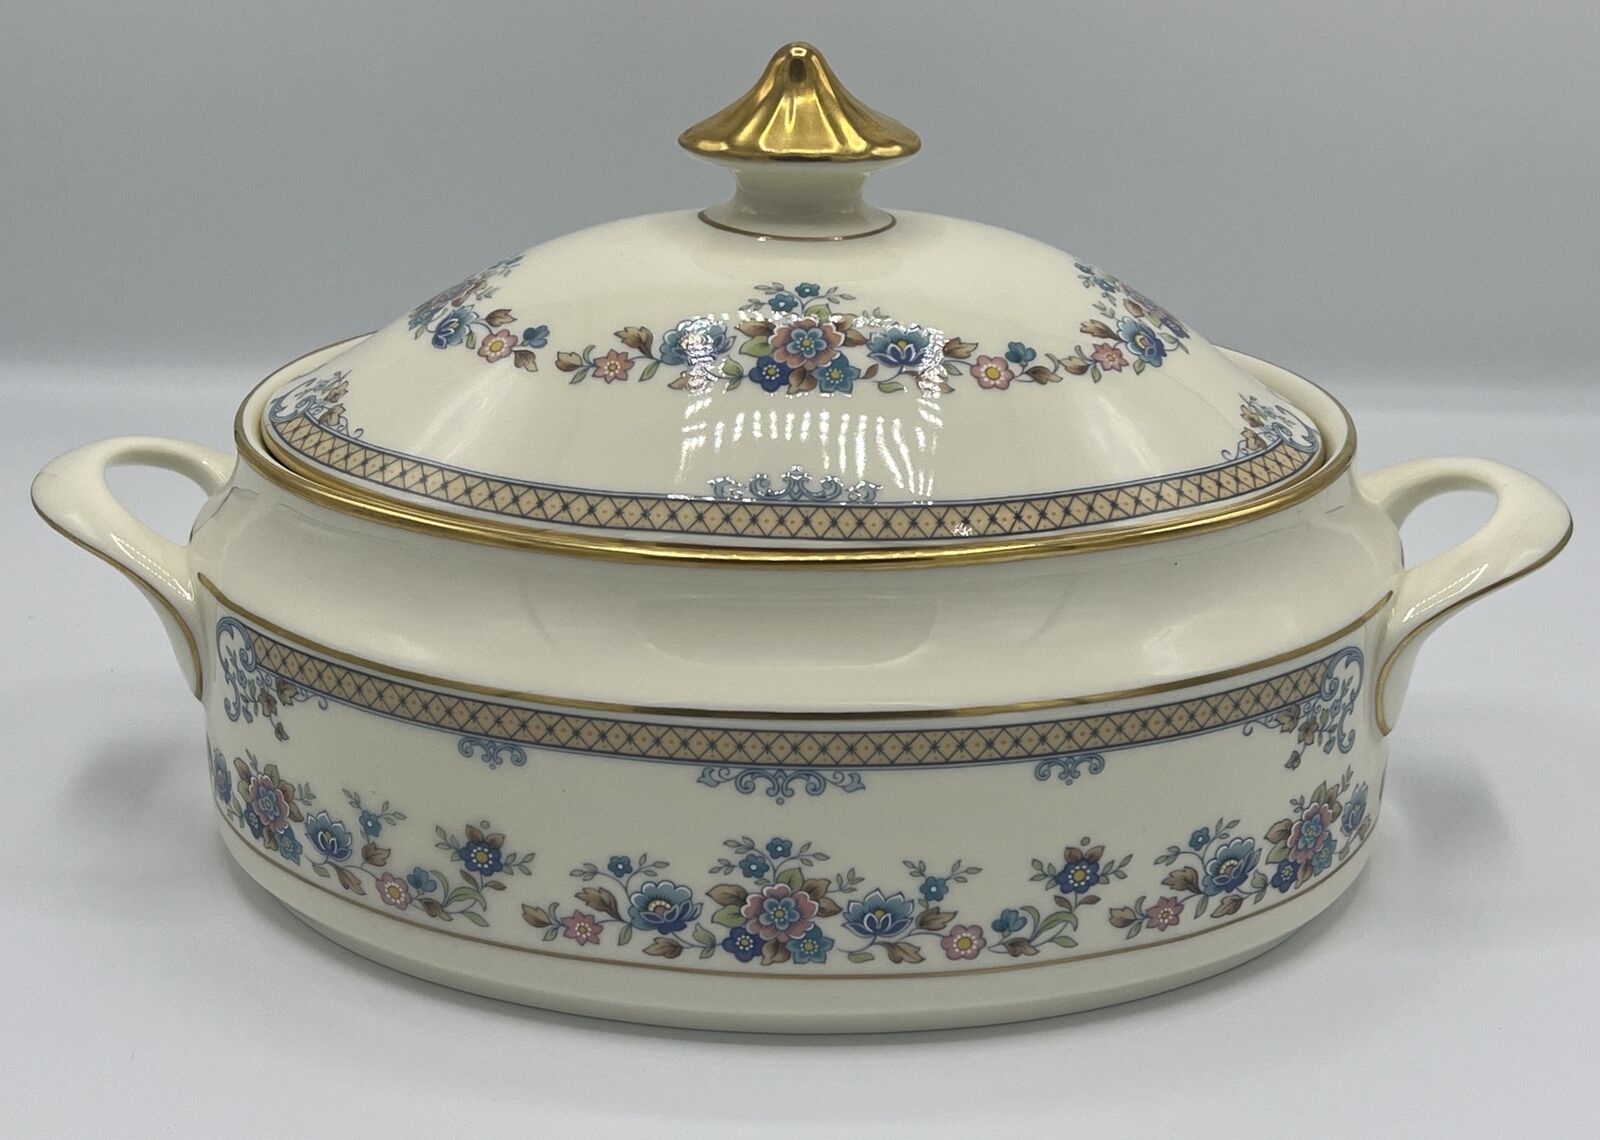 MINTON BYRON COVERED OVAL VEGETABLE DISH CASSEROLE - IDENTICAL TO AVONLEA DESIGN